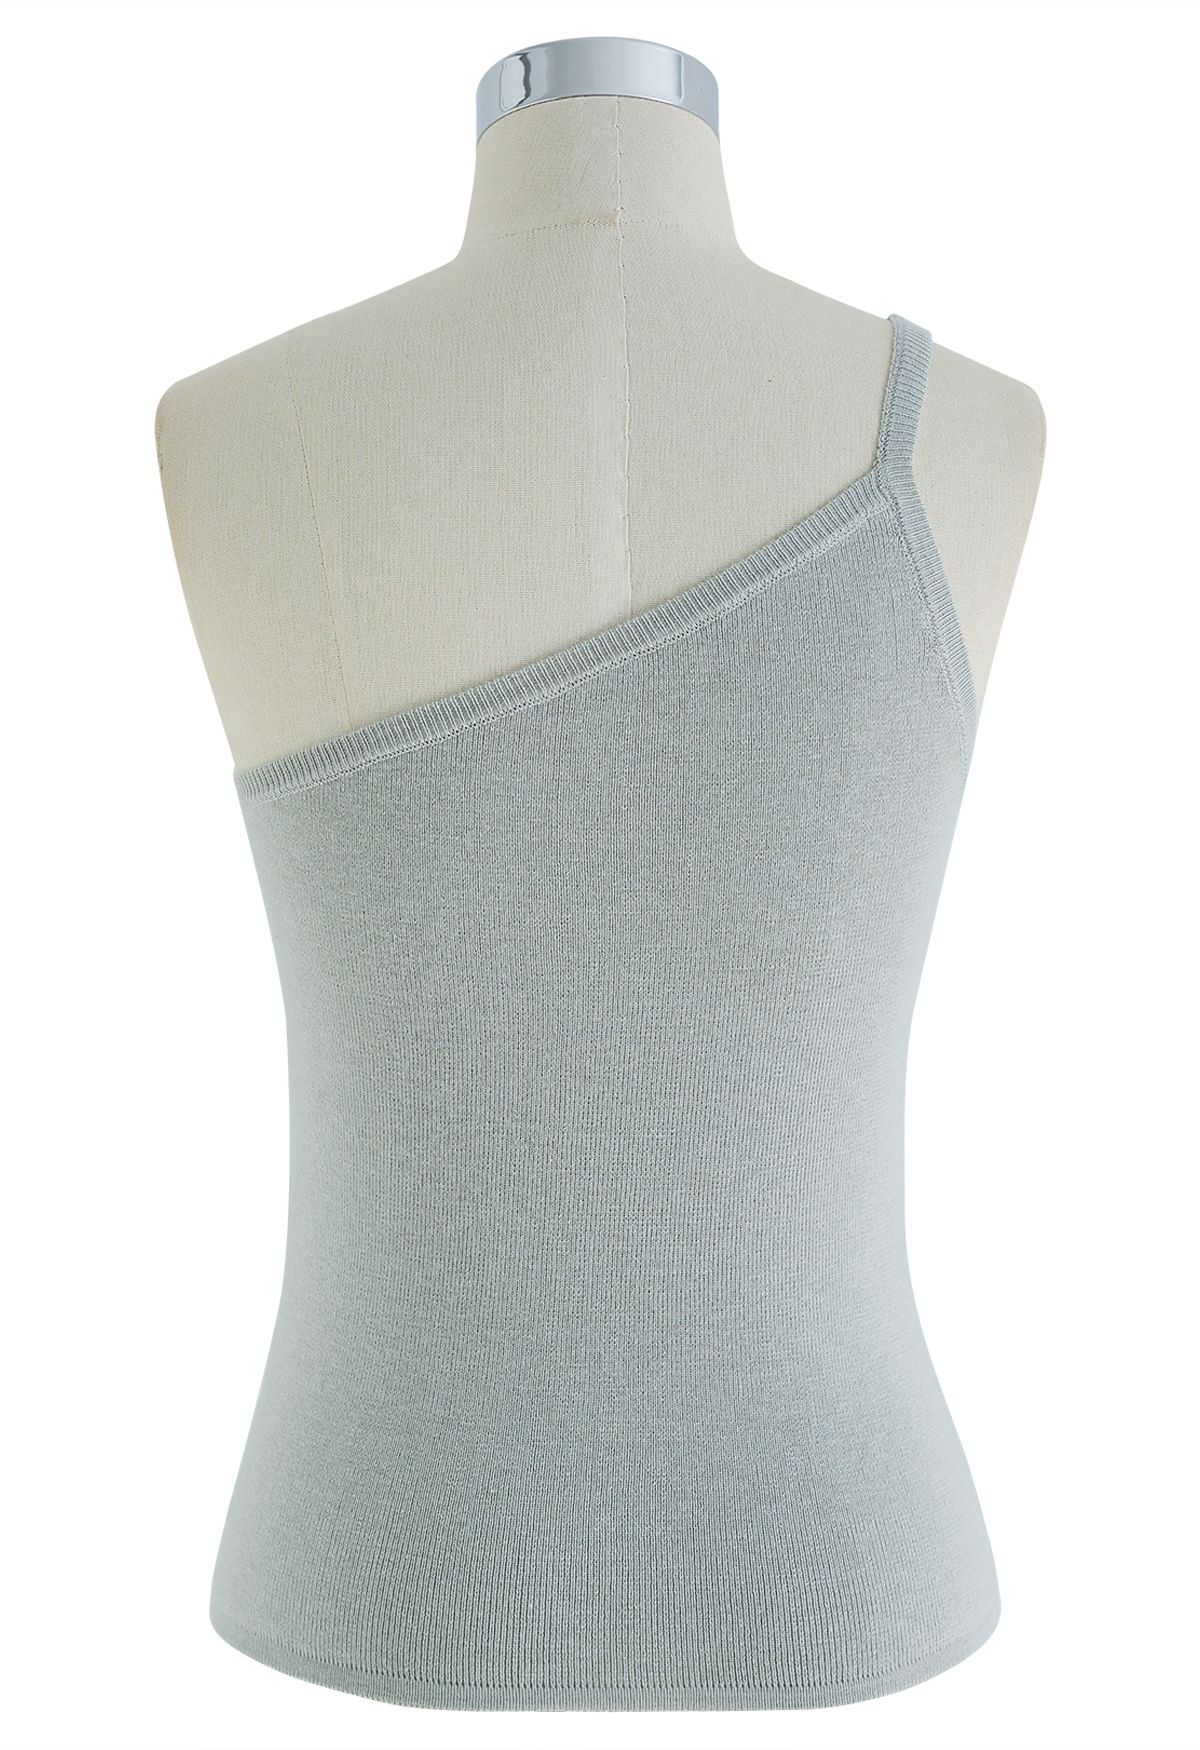 Strappy One-Shoulder Knit Tank Top in Grey